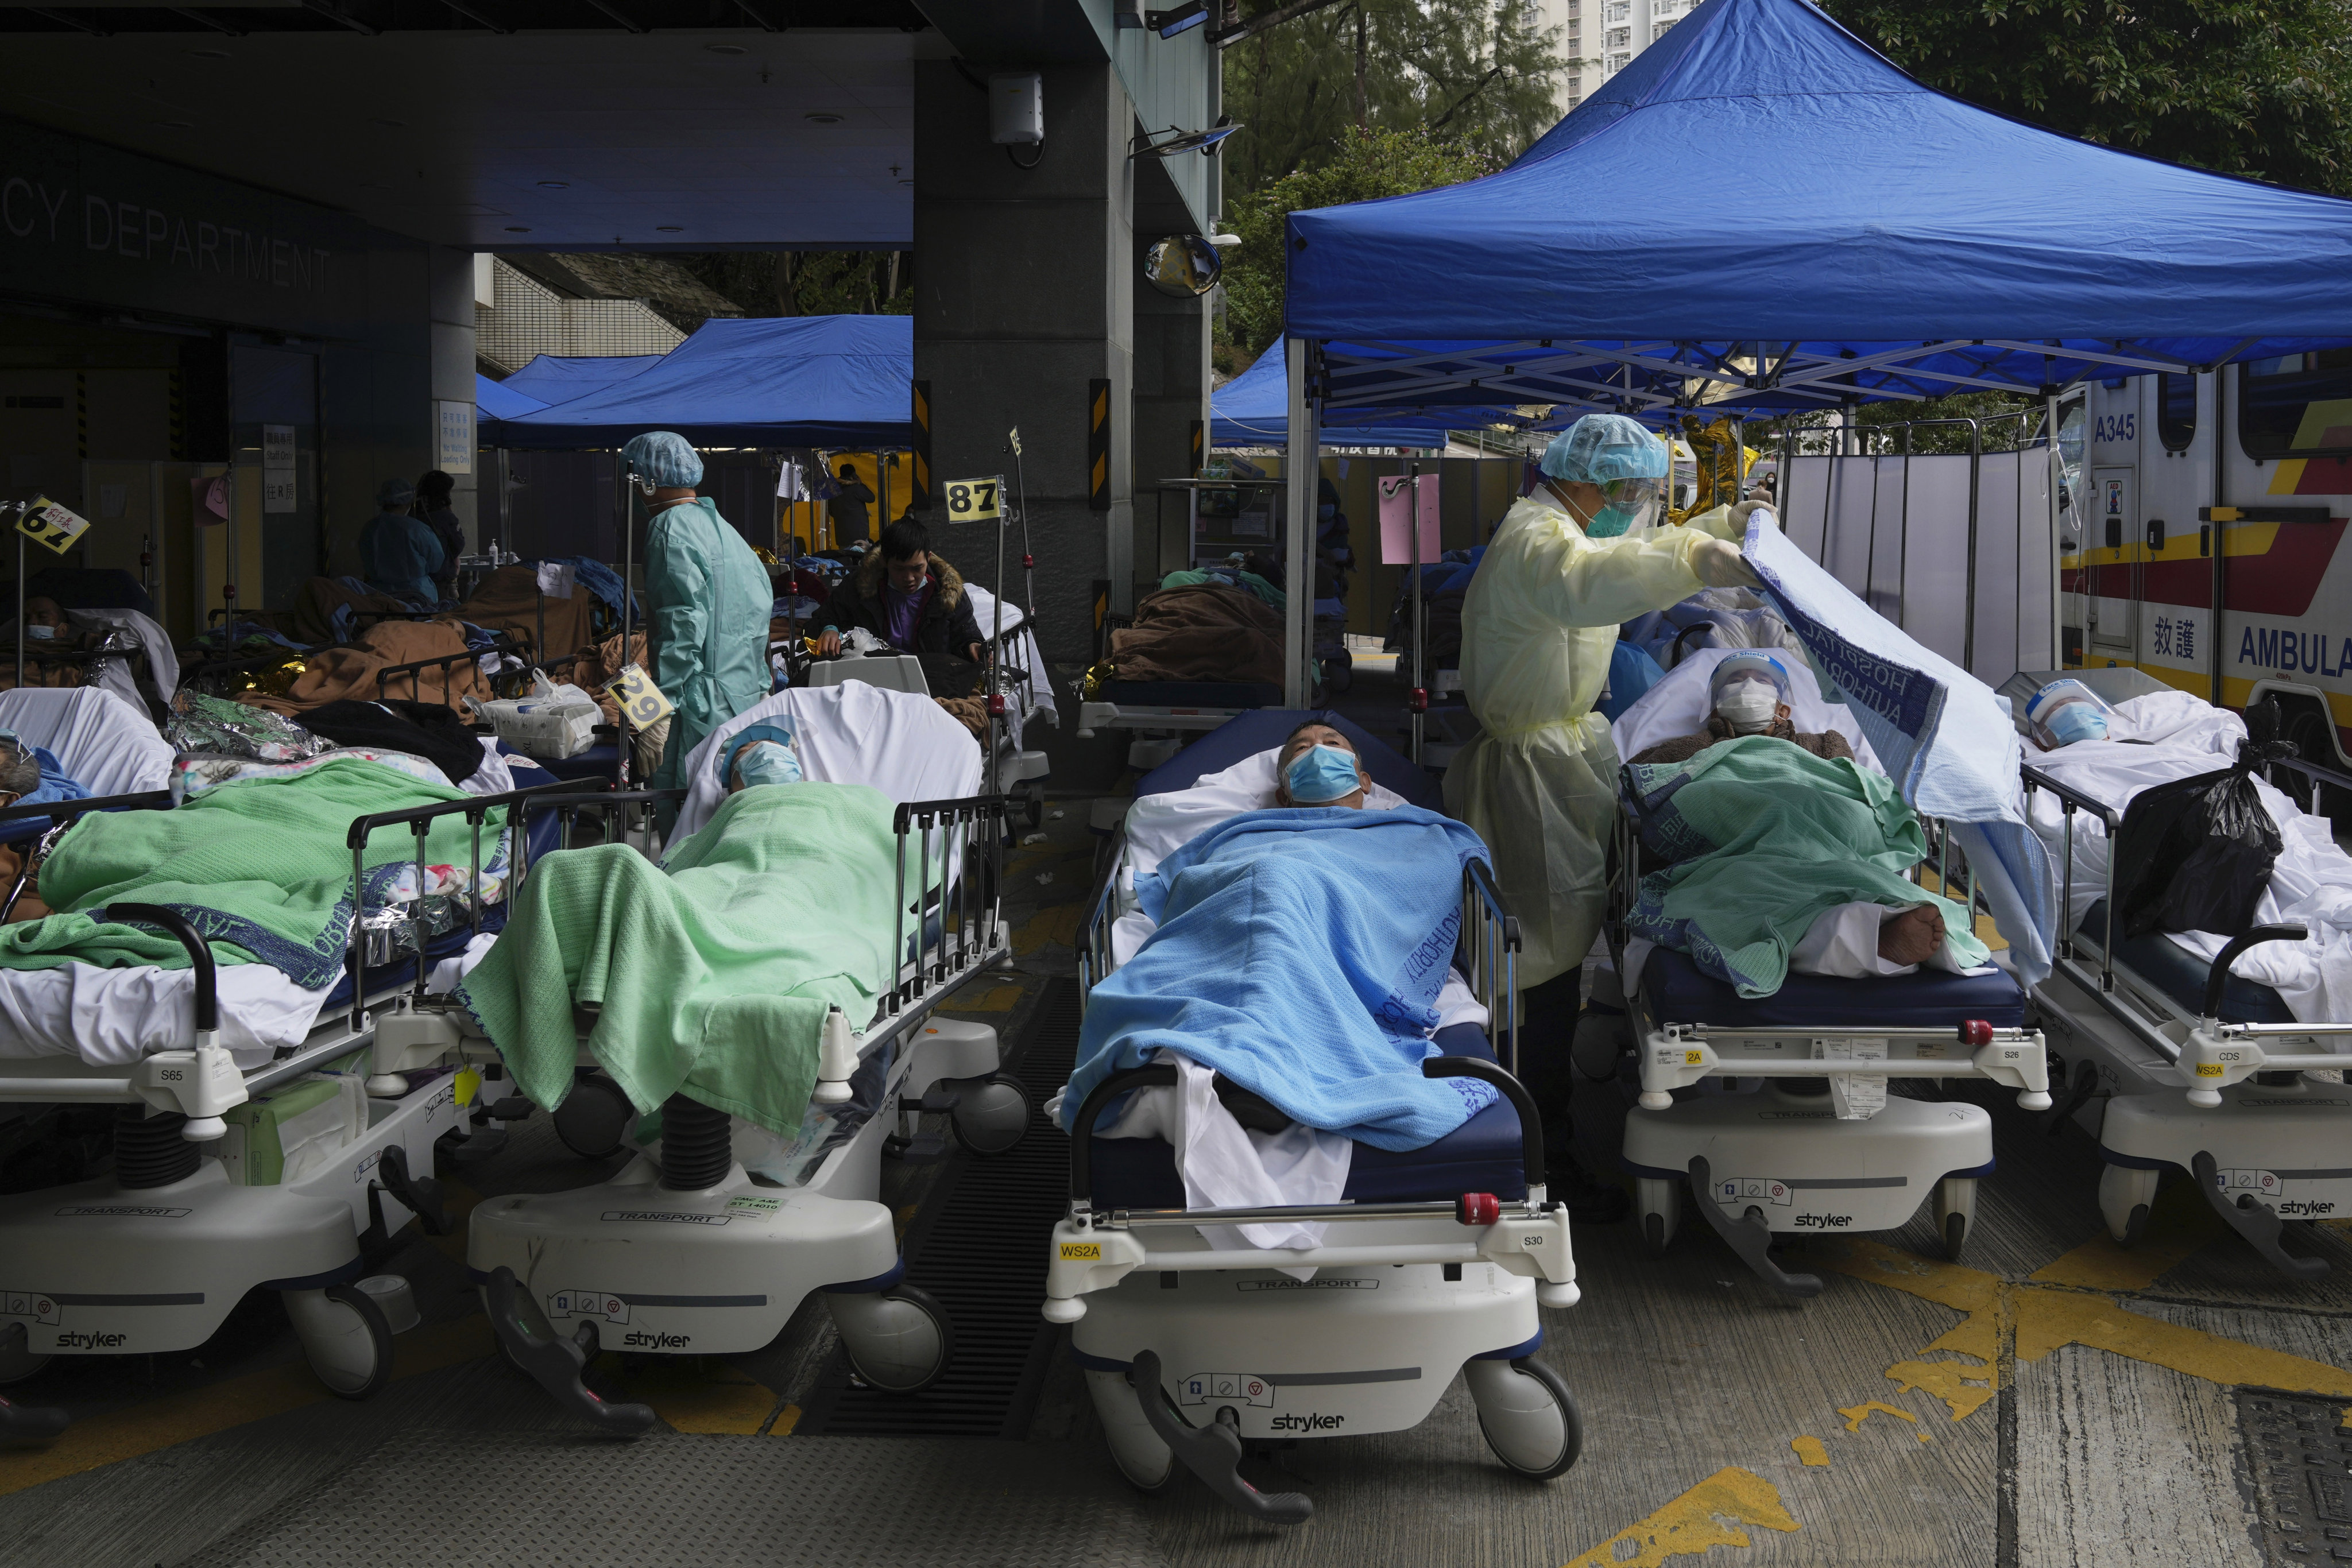 Patients lie on hospital beds as they wait at a temporary makeshift treatment area outside the Caritas Medical Centre in Sham Shui Po on February 18, 2022. Hong Kong’s experience during the fifth wave of the Covid-19 pandemic showed the importance of local experts producing timely research, something that can strengthen the city’s push to be a biomedical innovation hub and inform national policymaking. Photo: AP